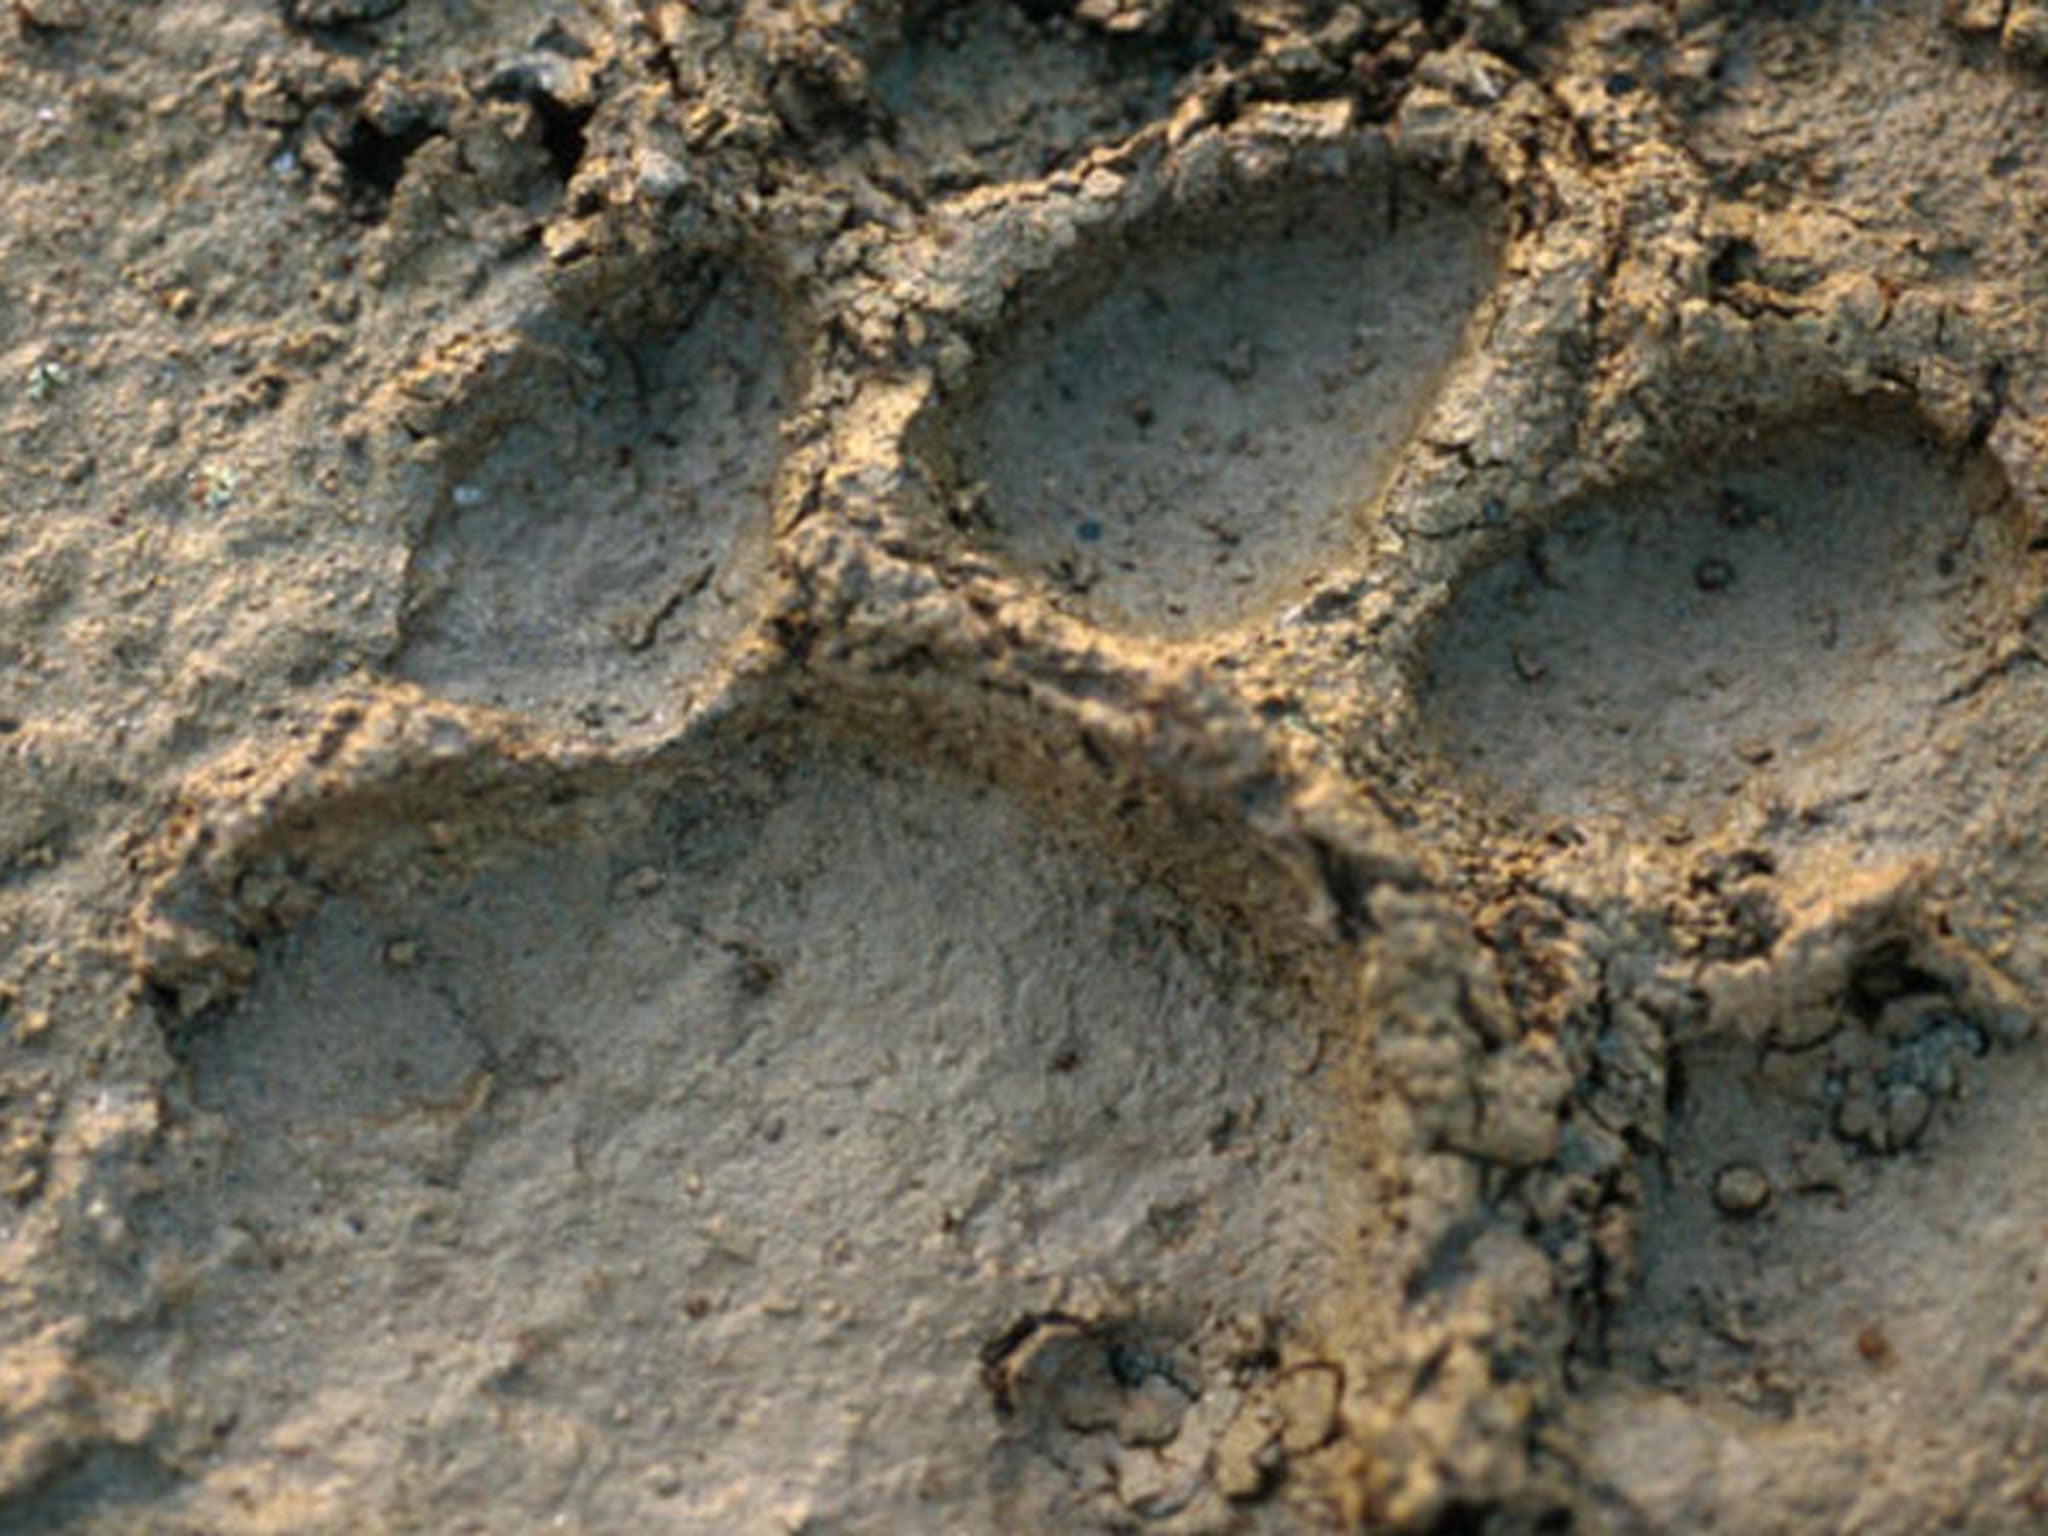 A Bengal tiger track in Royal Bardia National Park, Nepal